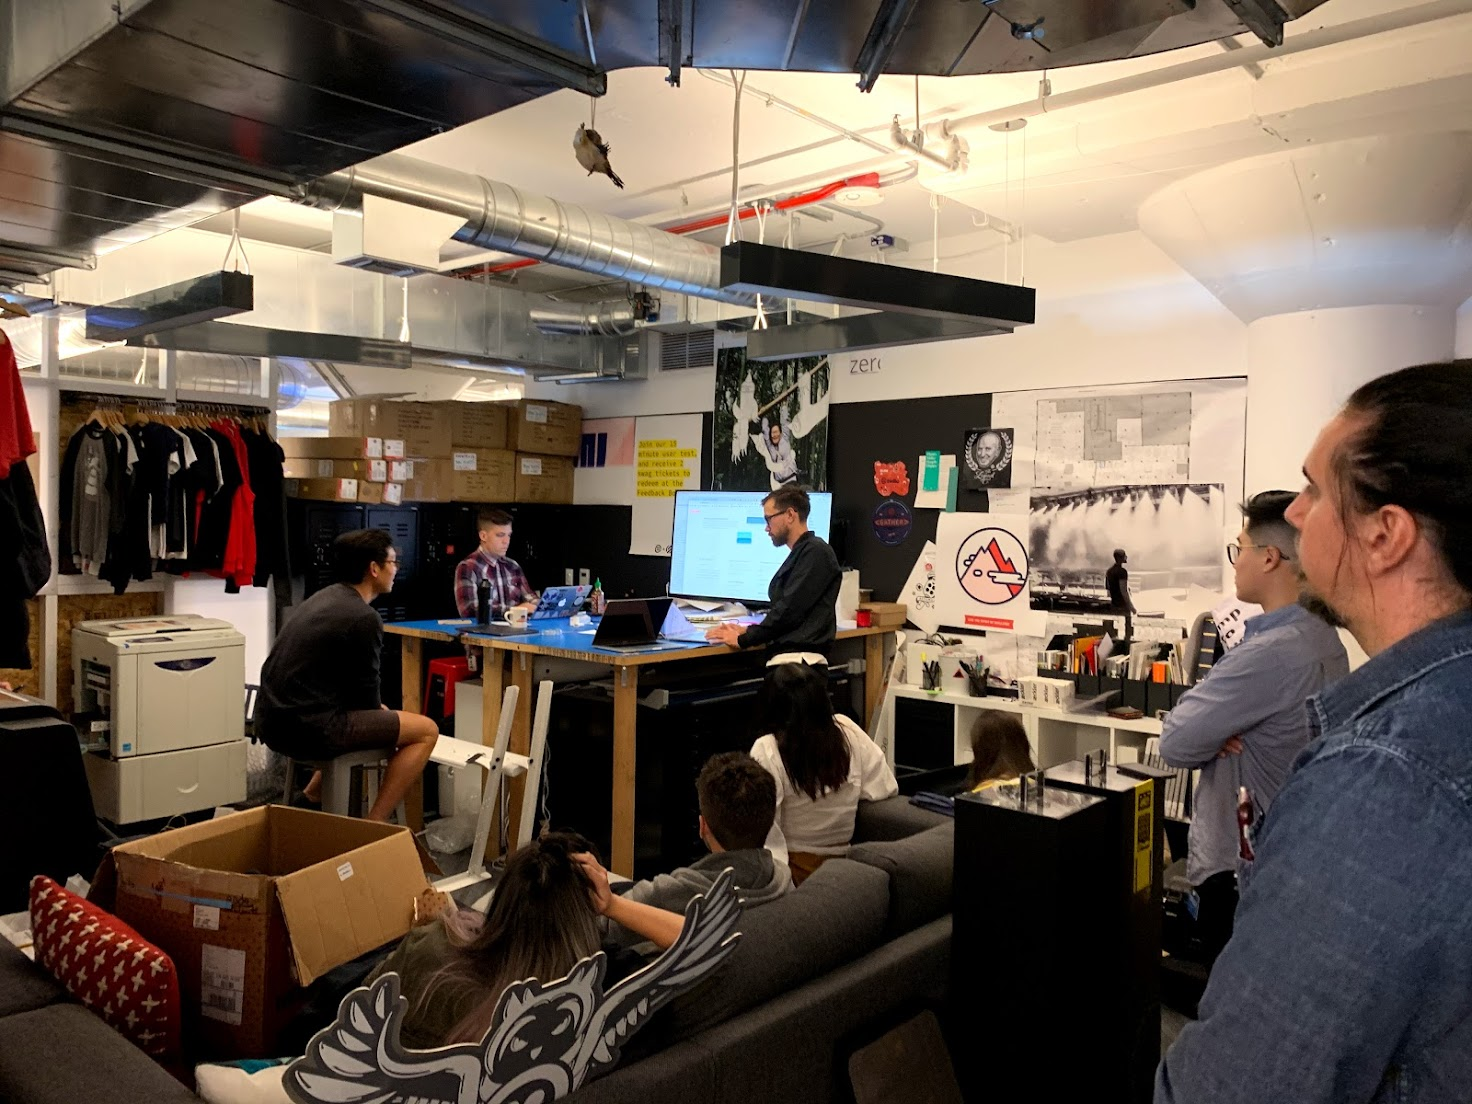 A design review at the Twilio Beale Street office